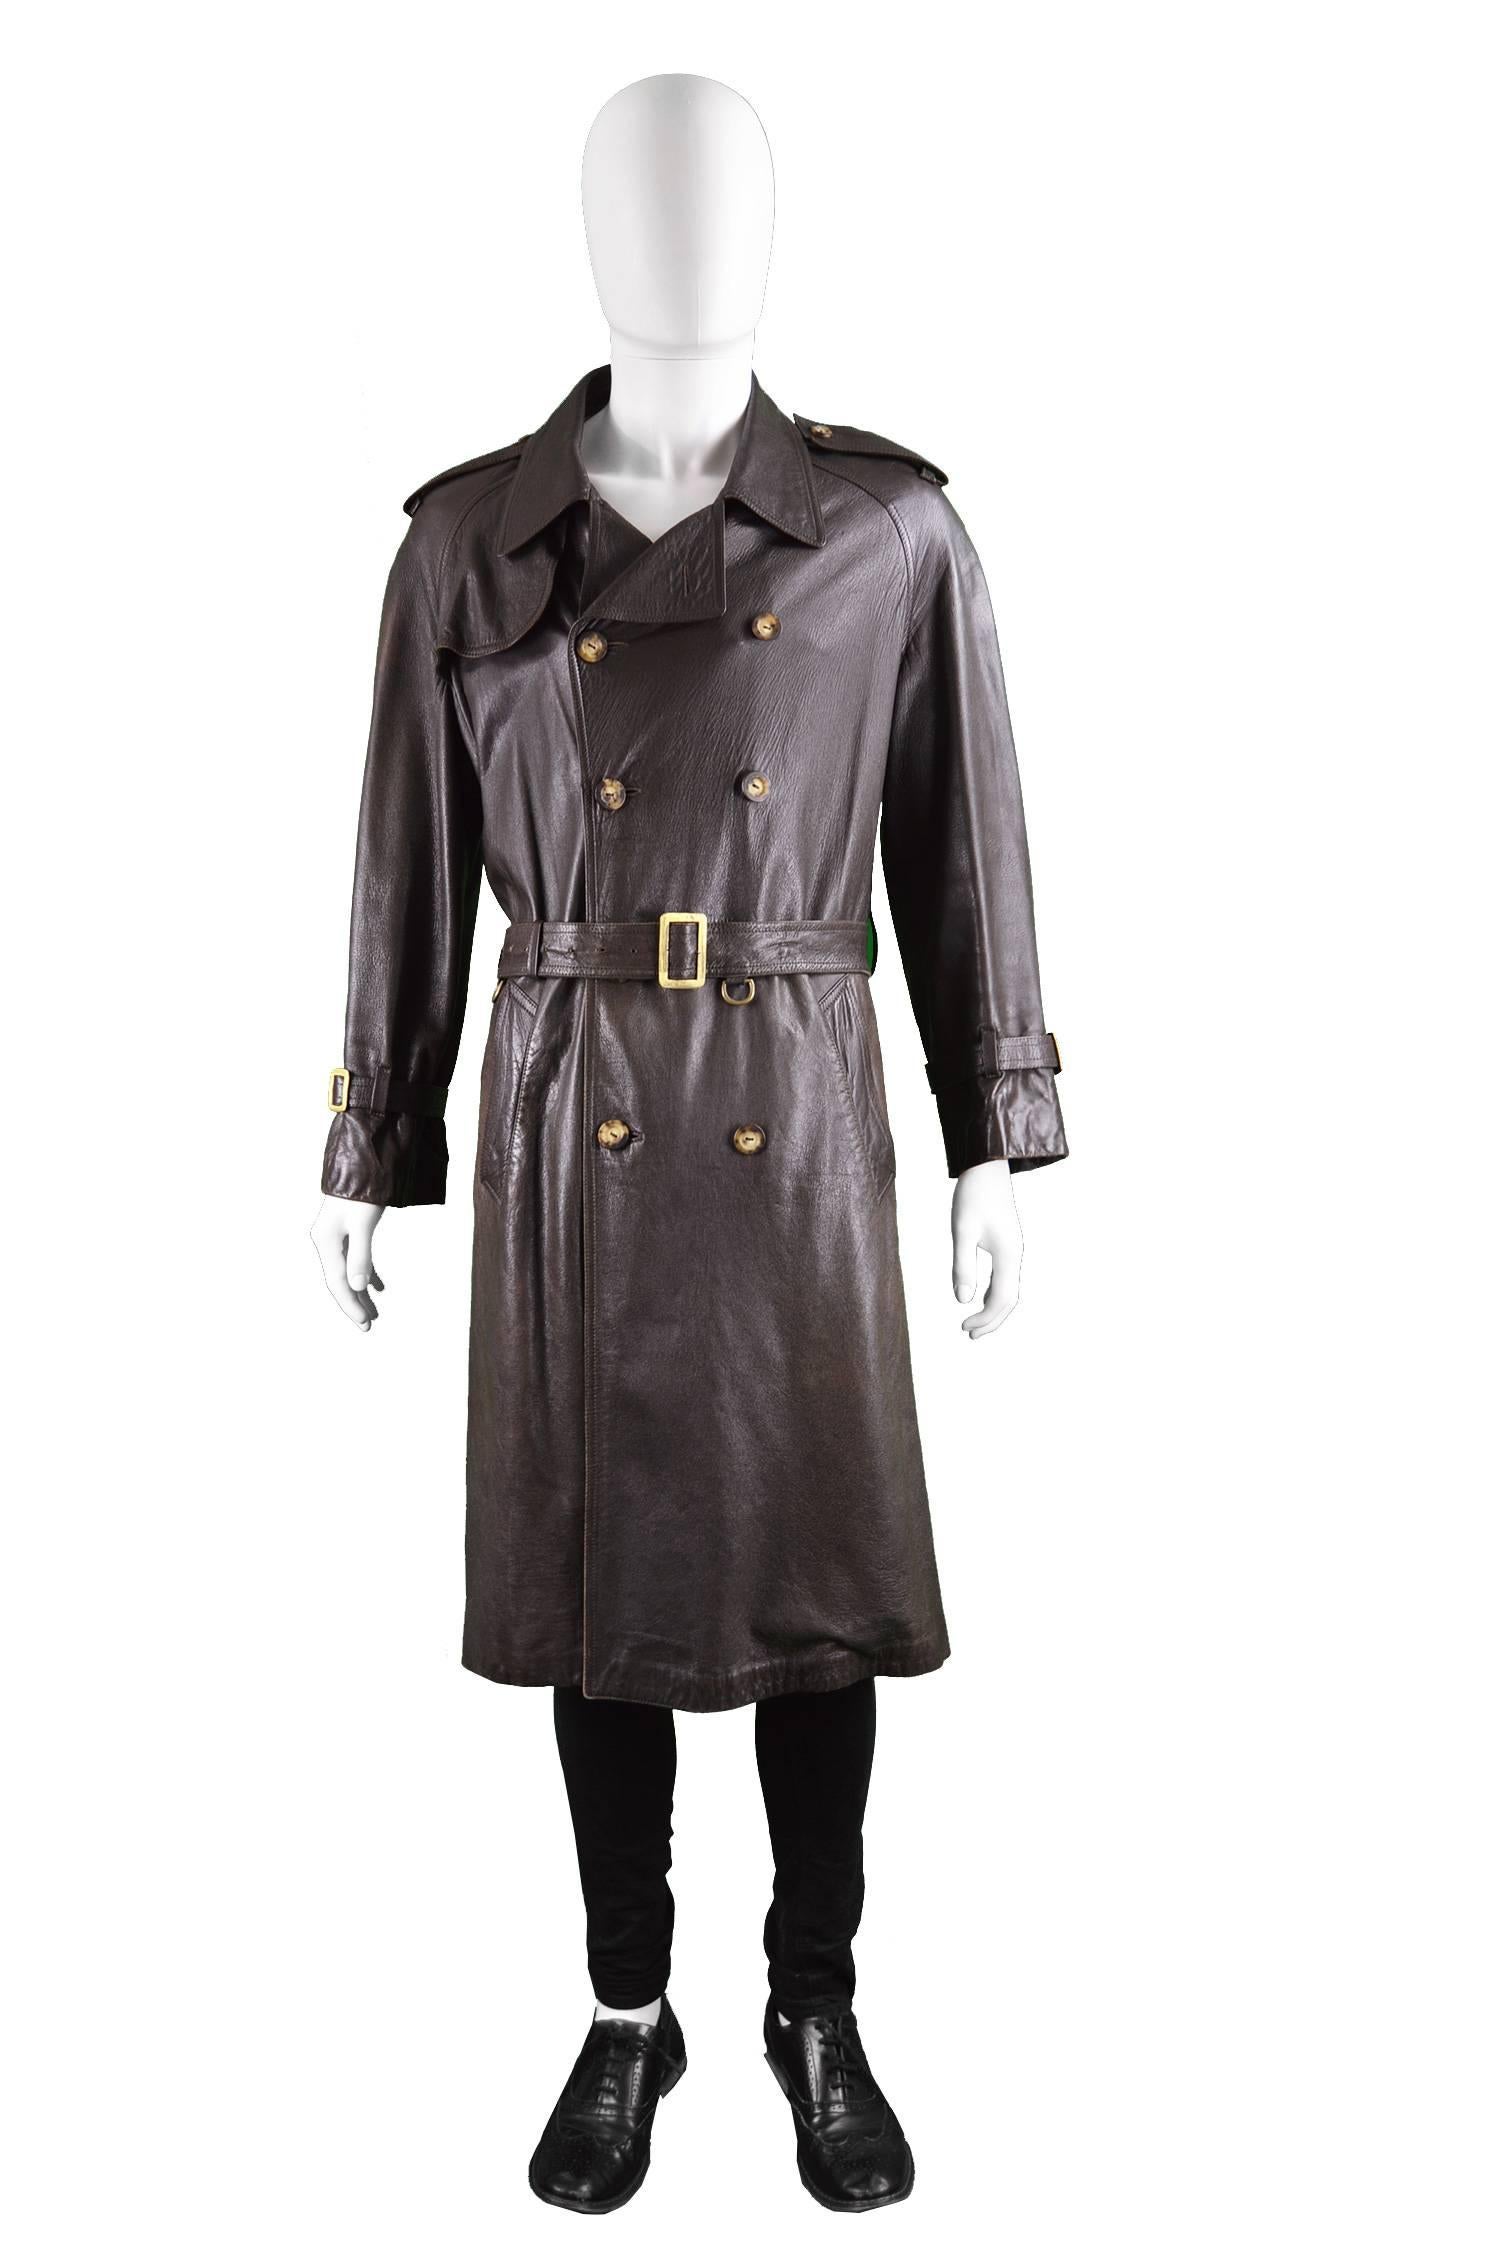 An incredible and rare vintage men's leather trenchcoat from the 60s by legendary British luxury label, Burberry, when prior to 1998, they were known as 'Burberrys'. In a high quality brown leather with double breasted buttons a belt to pull in the